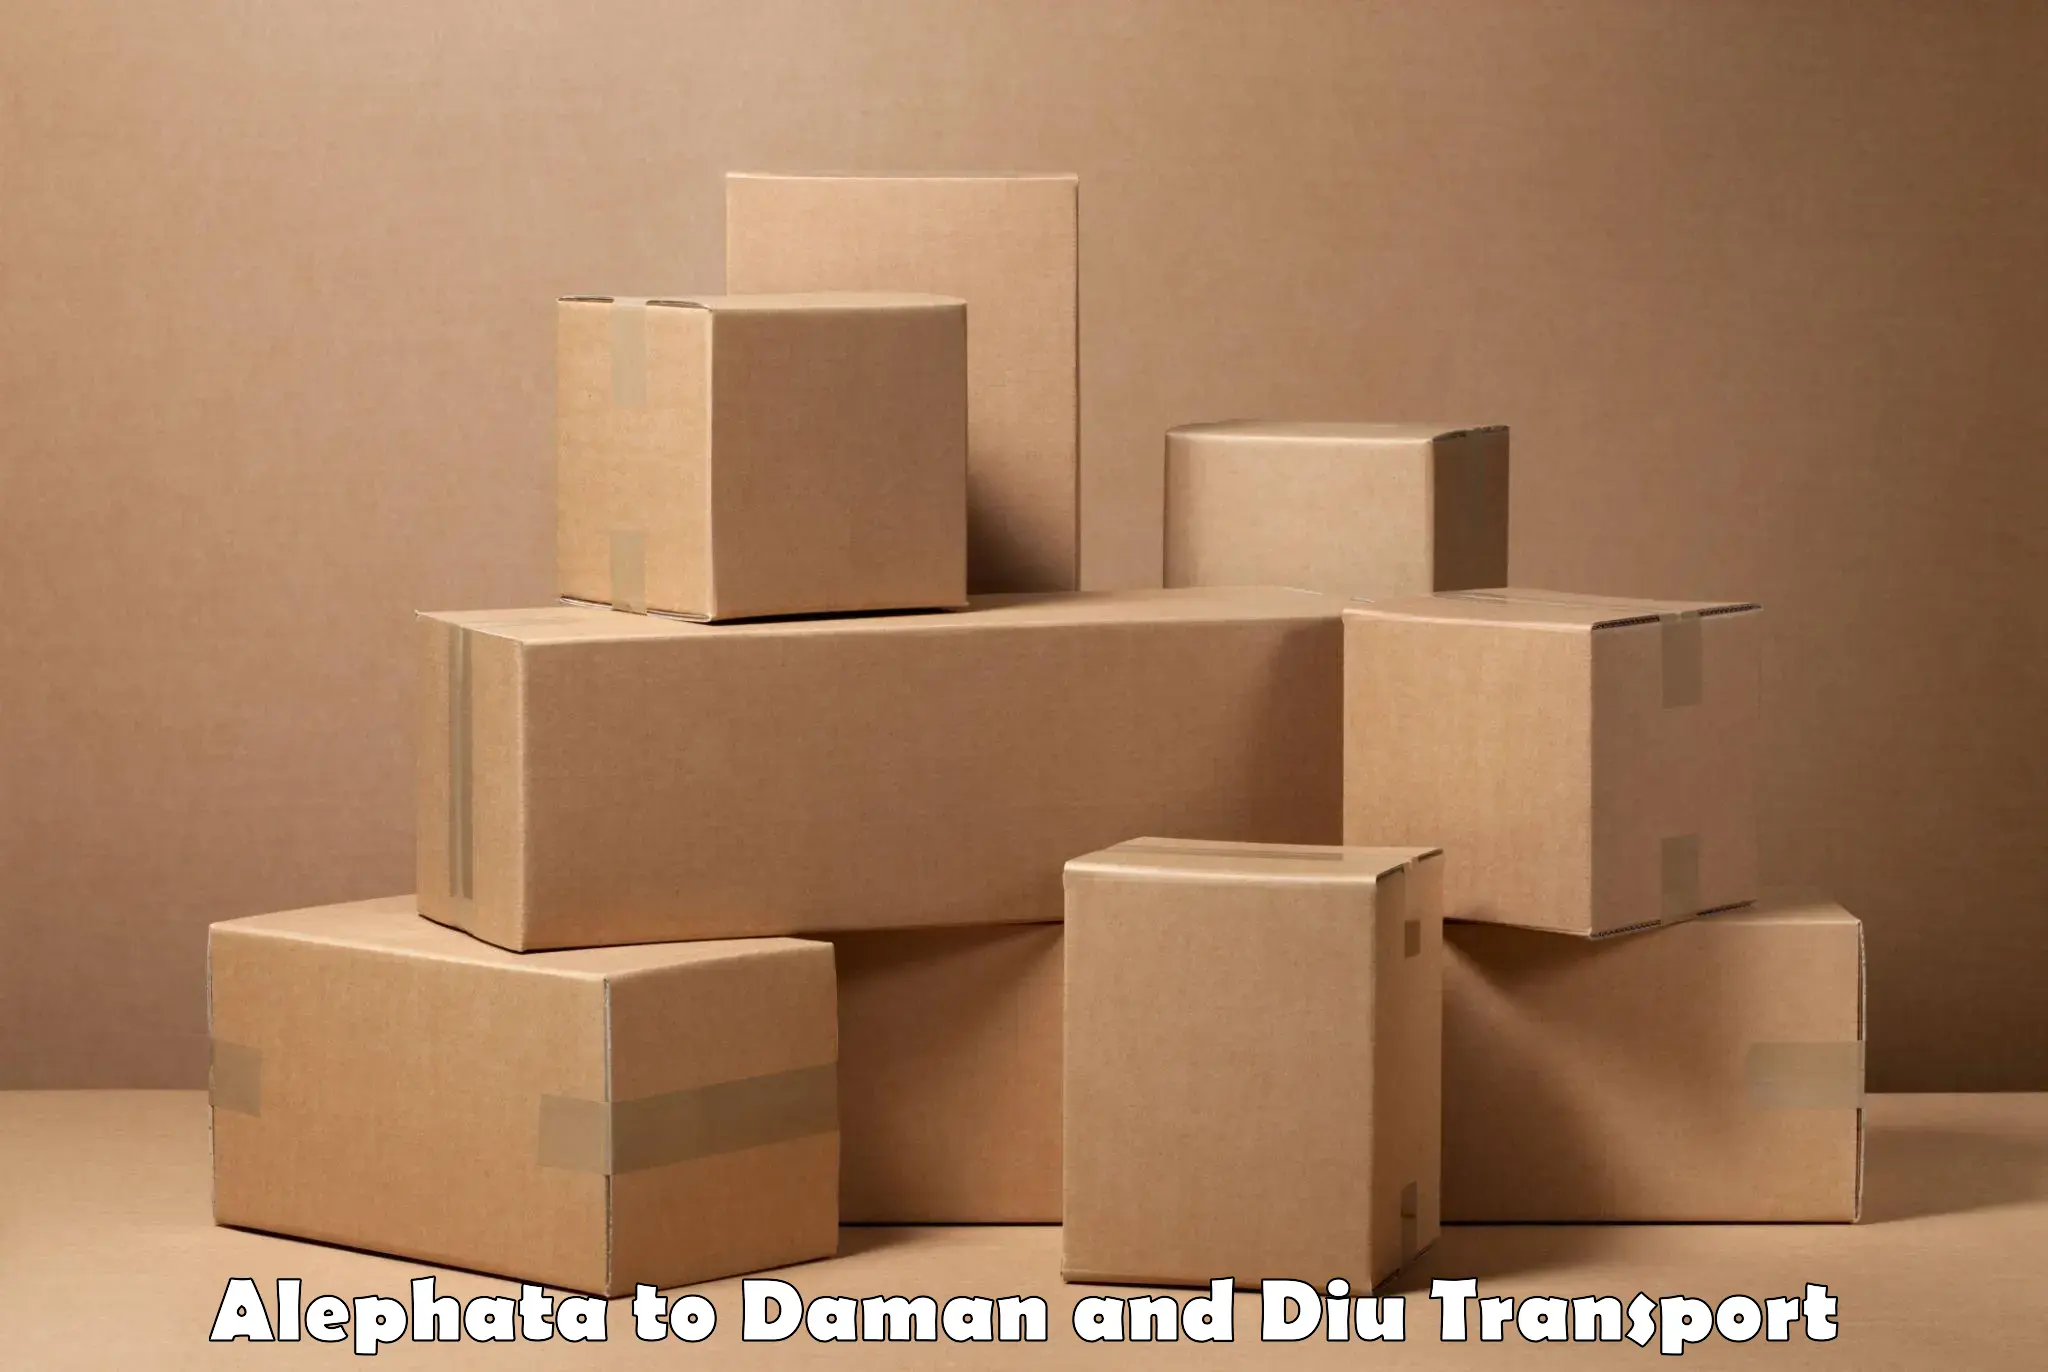 Air freight transport services Alephata to Daman